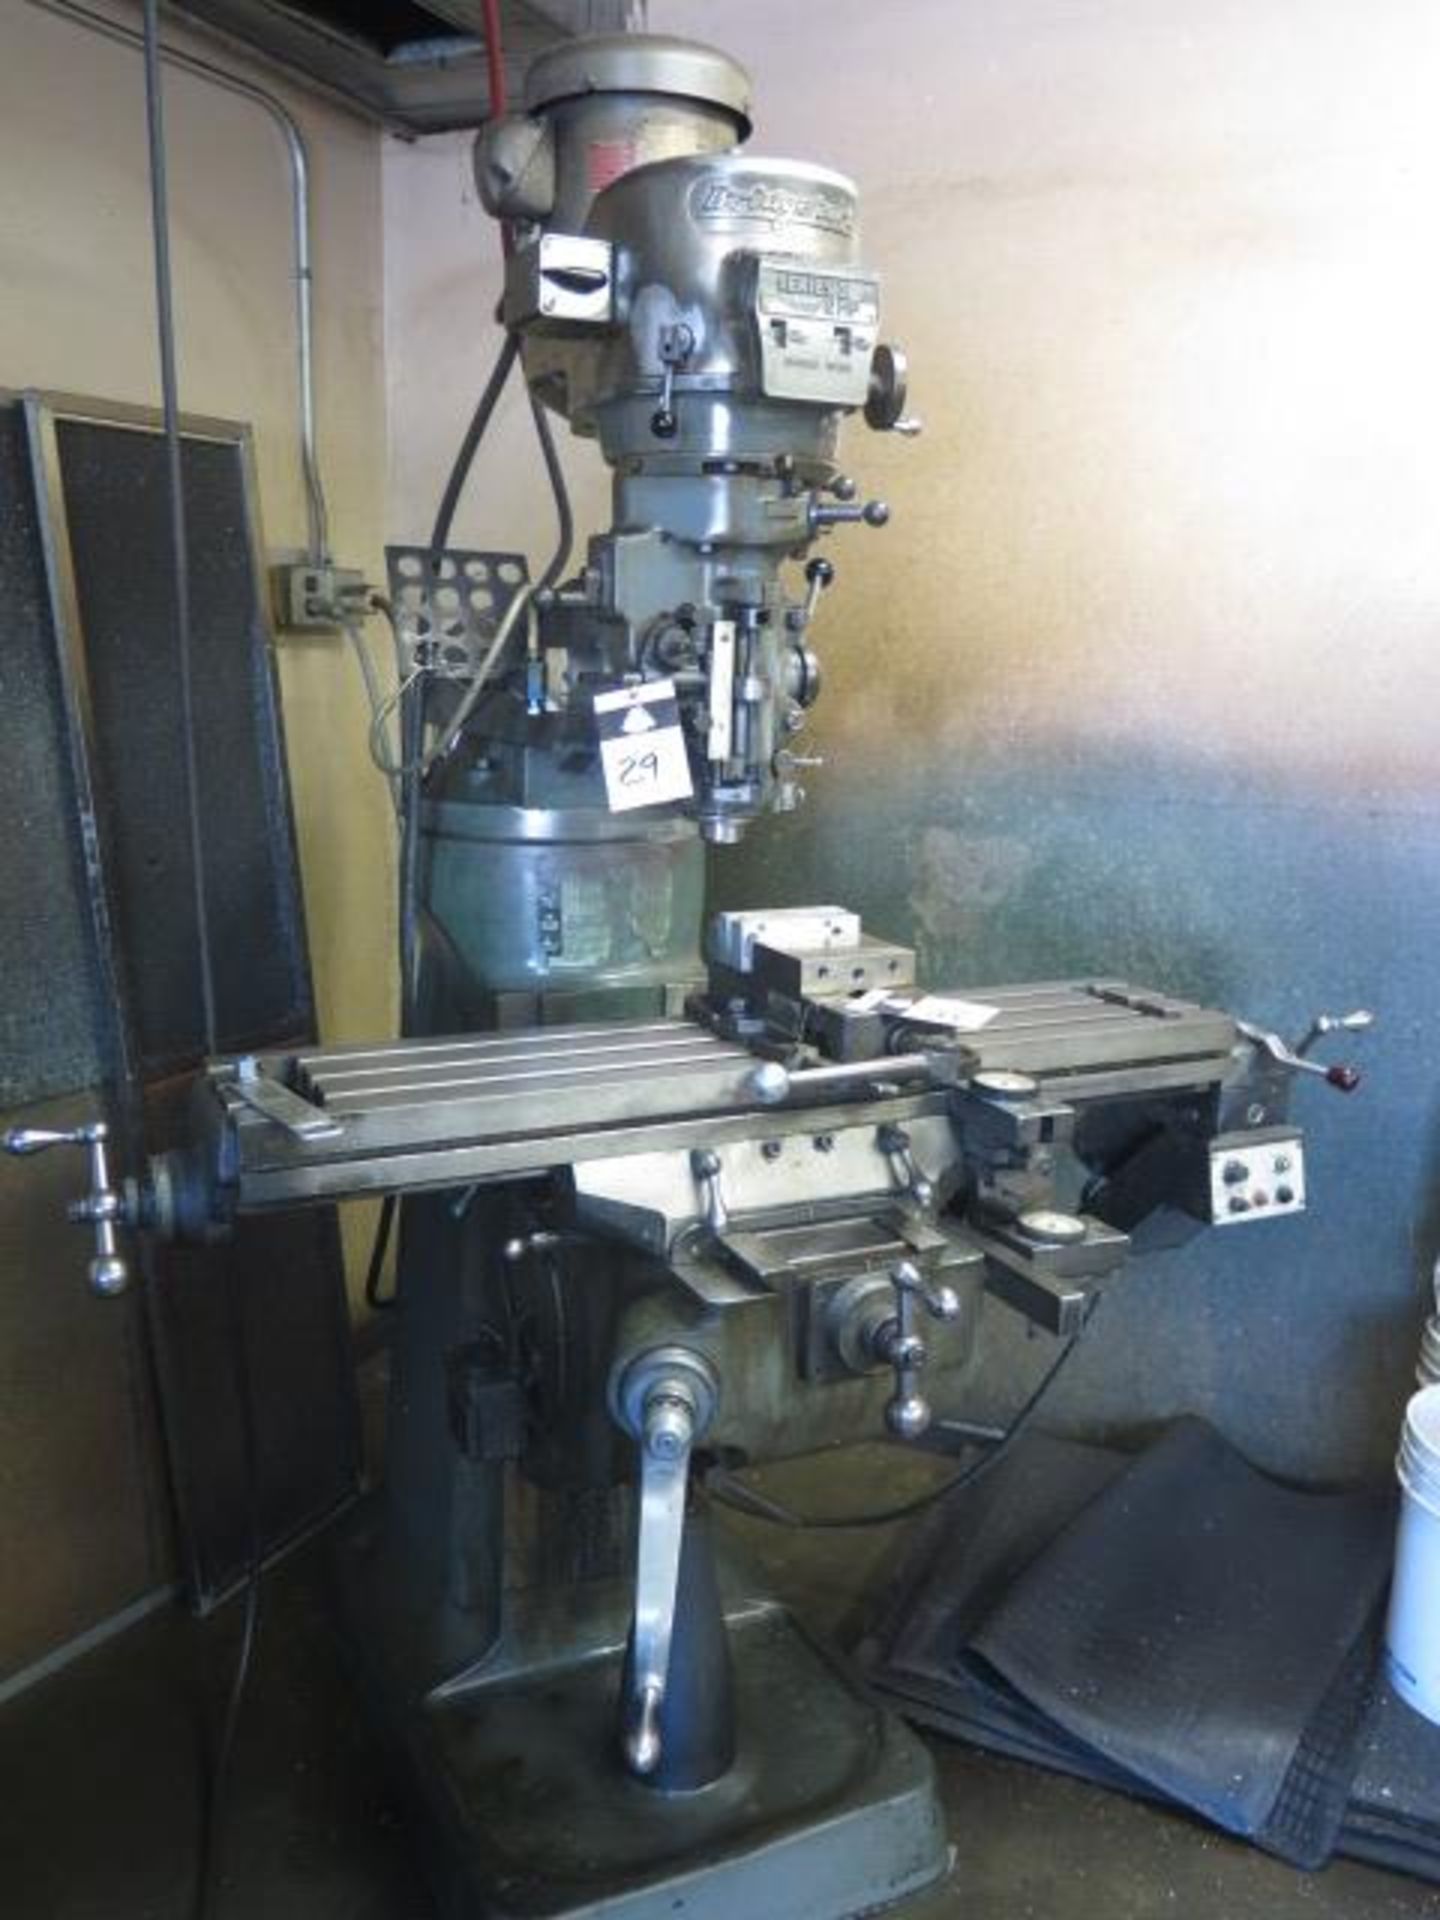 Bridgeport Series 1 2Hp Vertical Mill s/n 242570 w/ 60-4200 Dial Change RPM, Chrome Ways. SOLD AS IS